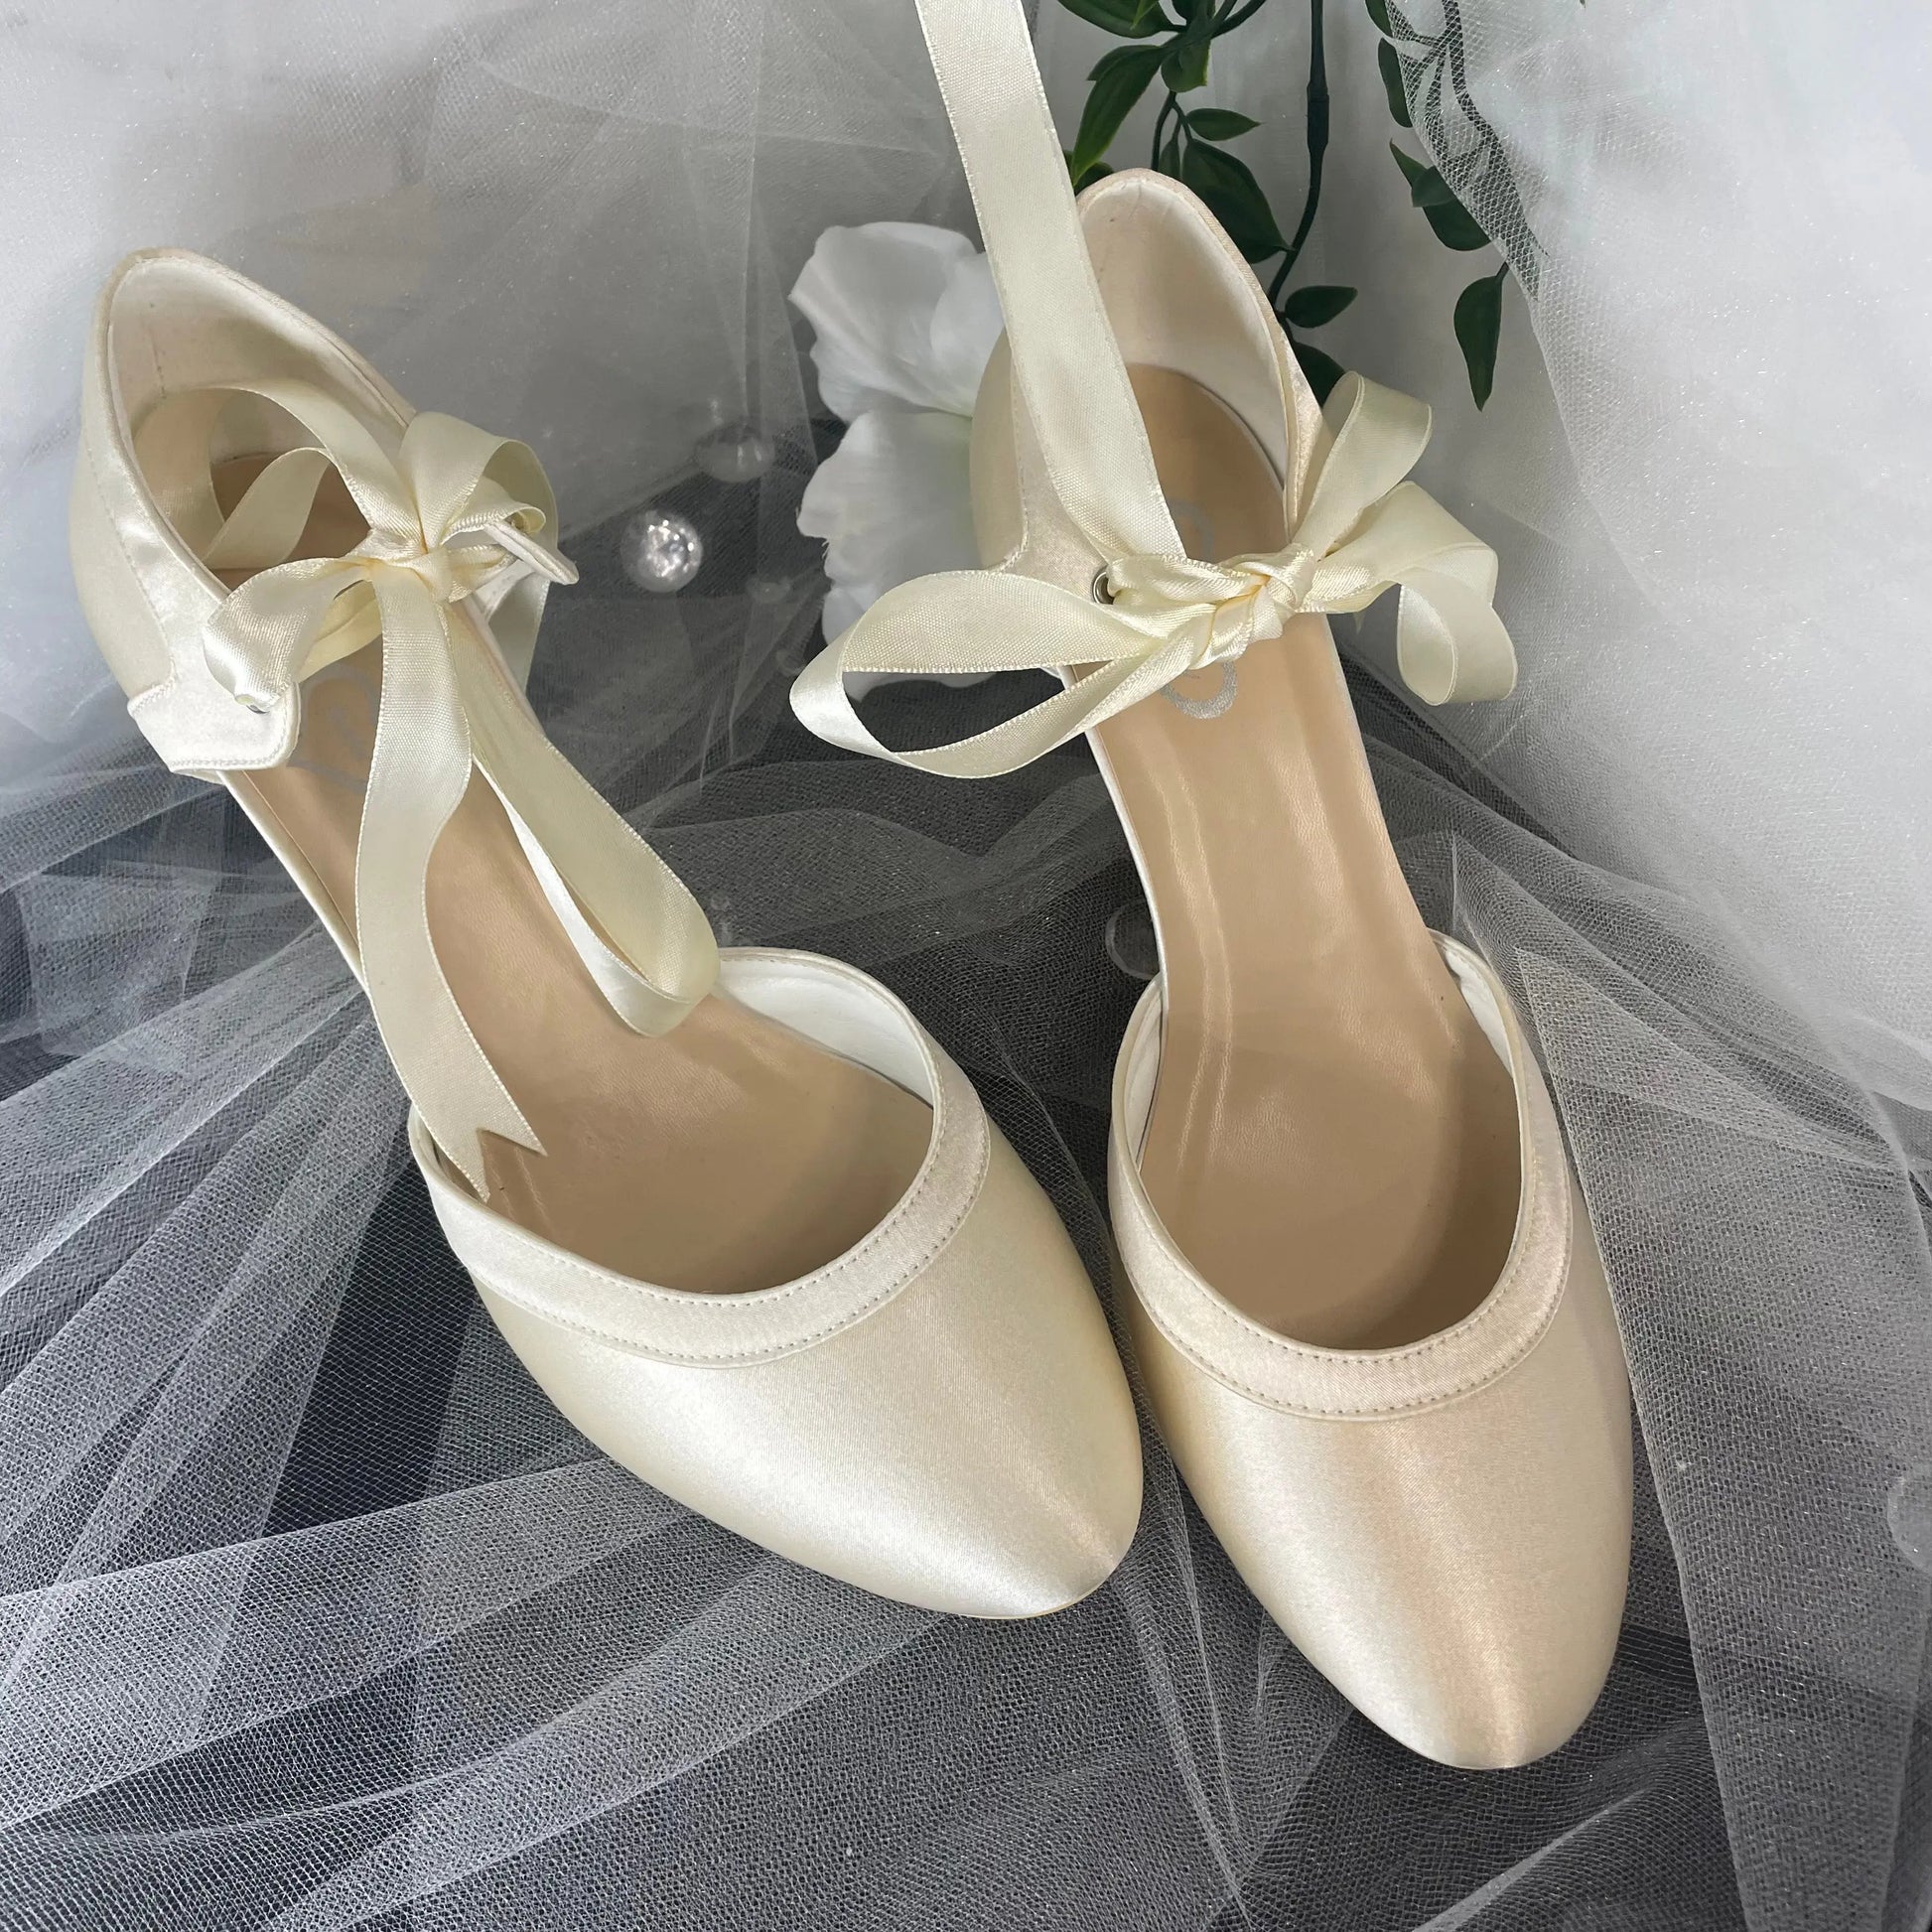 Ellie Bridal Shoe Pair Front View Different Color: Front view of two Ellie Closed Toe Ribbon Ankle Strap Wedding Bridal Shoes displaying the graceful design and color variation.